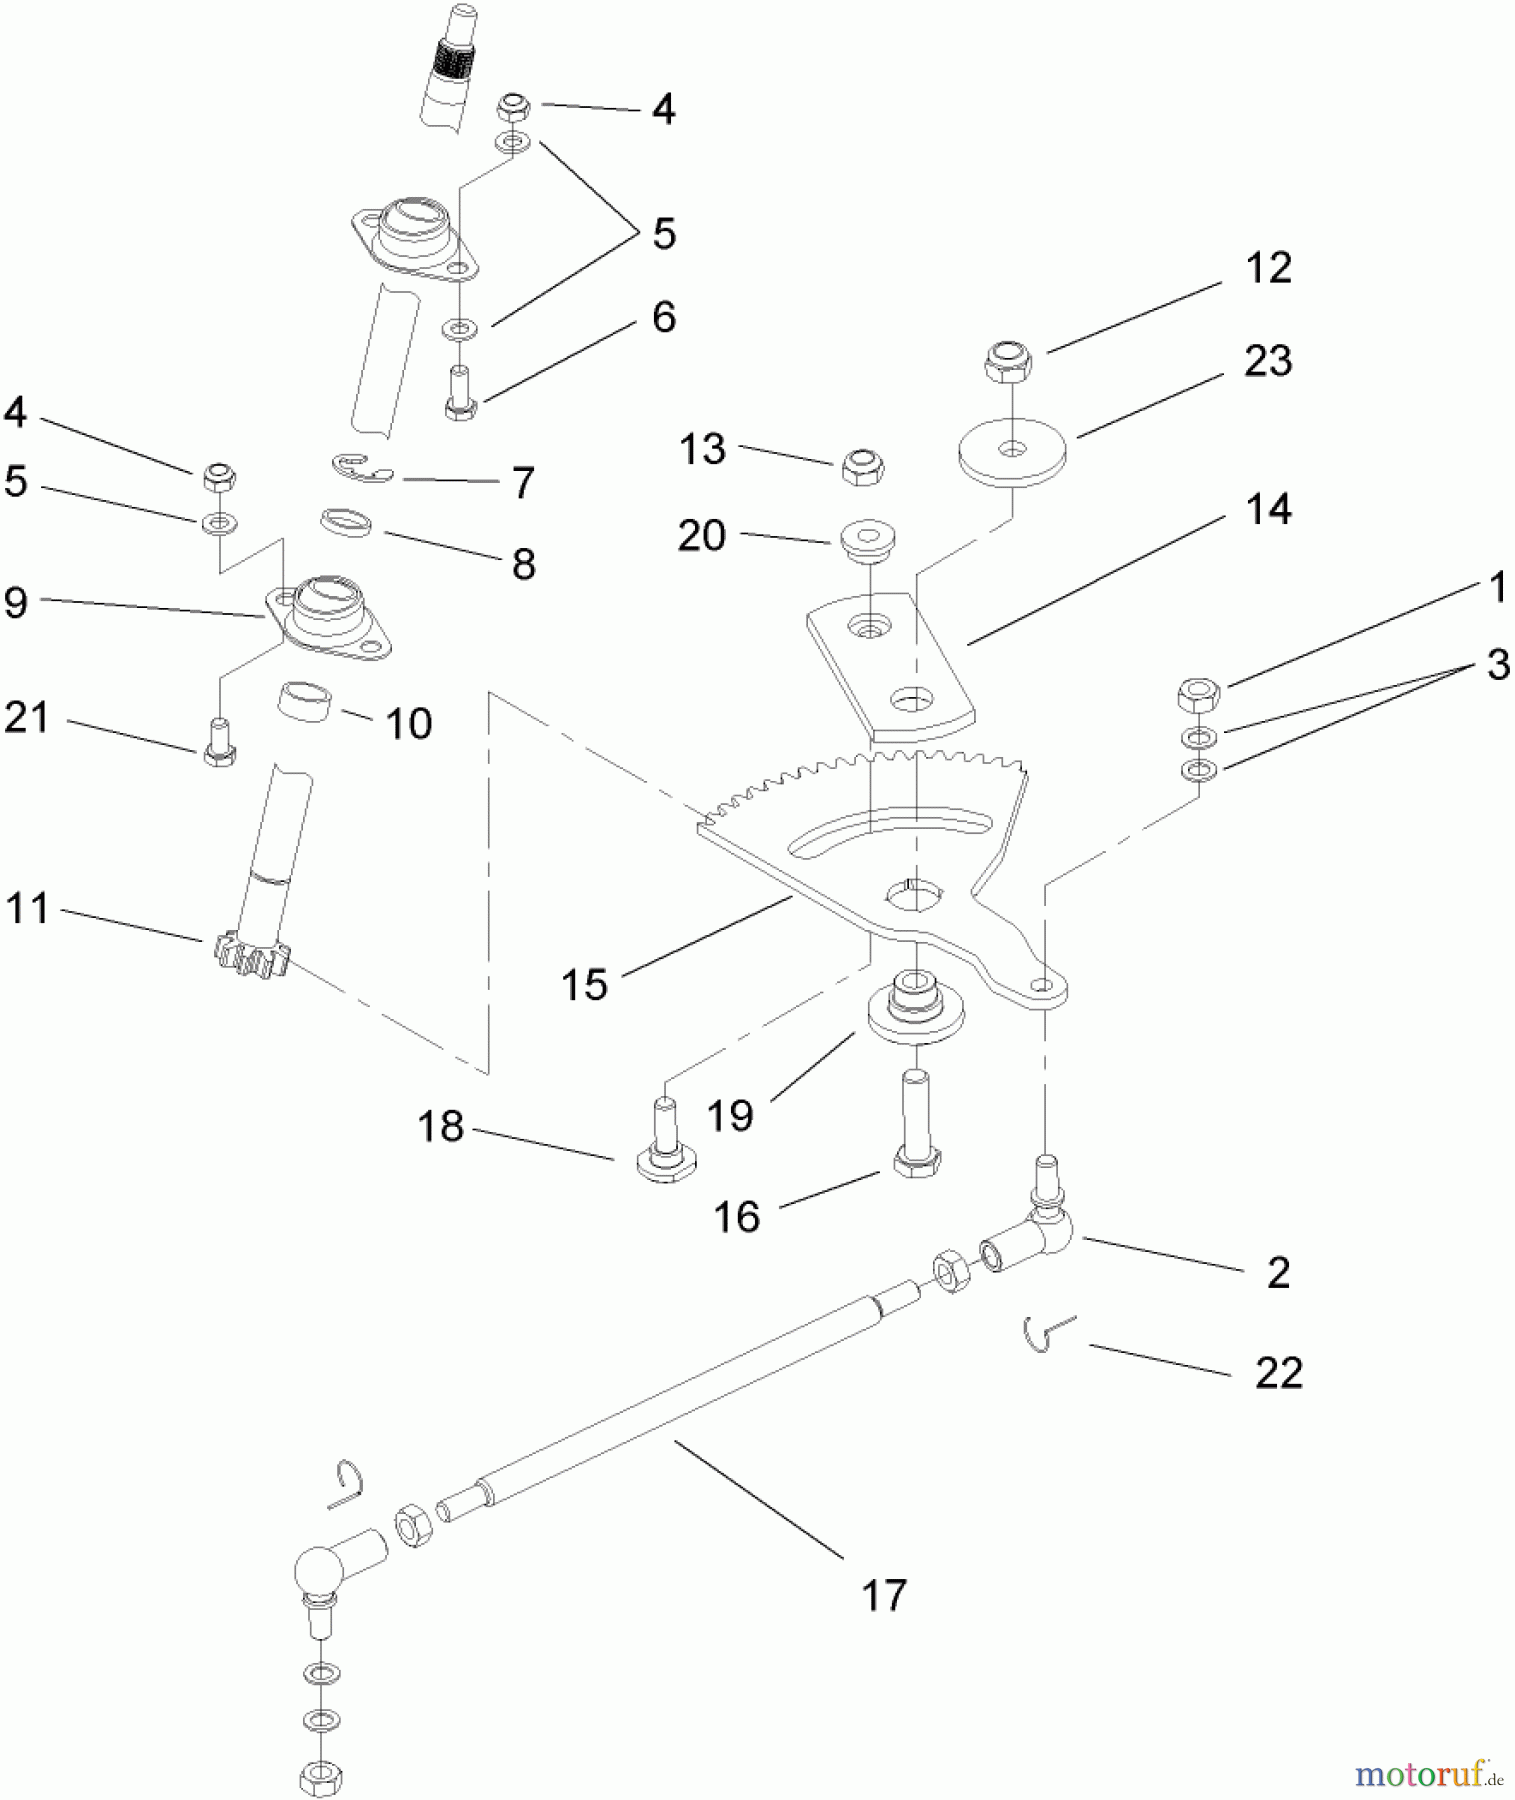  Toro Neu Mowers, Lawn & Garden Tractor Seite 1 74592 (DH 220) - Toro DH 220 Lawn Tractor, 2009 (290000001-290999999) STEERING ASSEMBLY